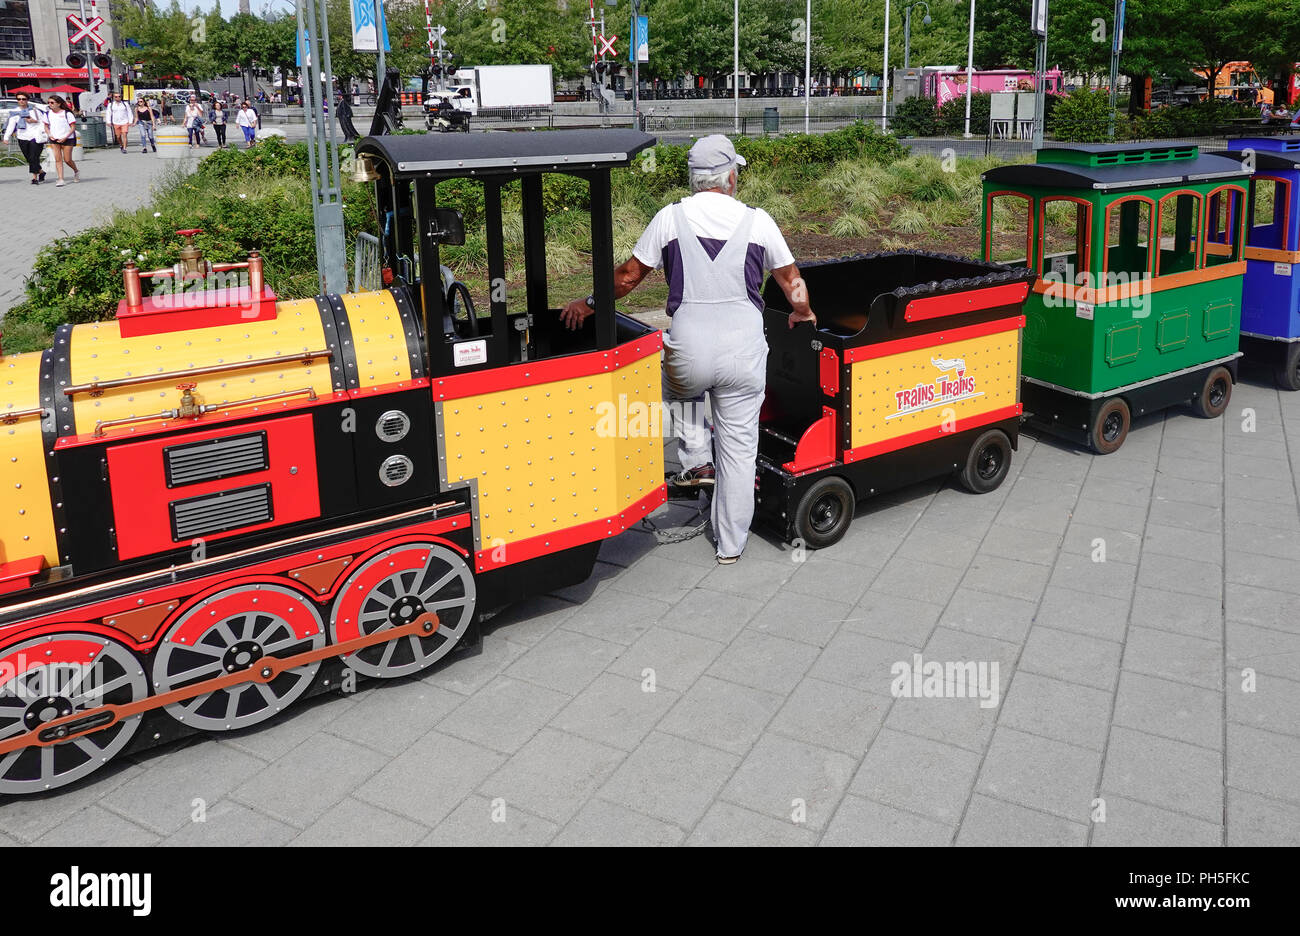 A children's toy steam engine train ride at the Old Port in Montreal, QC, Canada Stock Photo